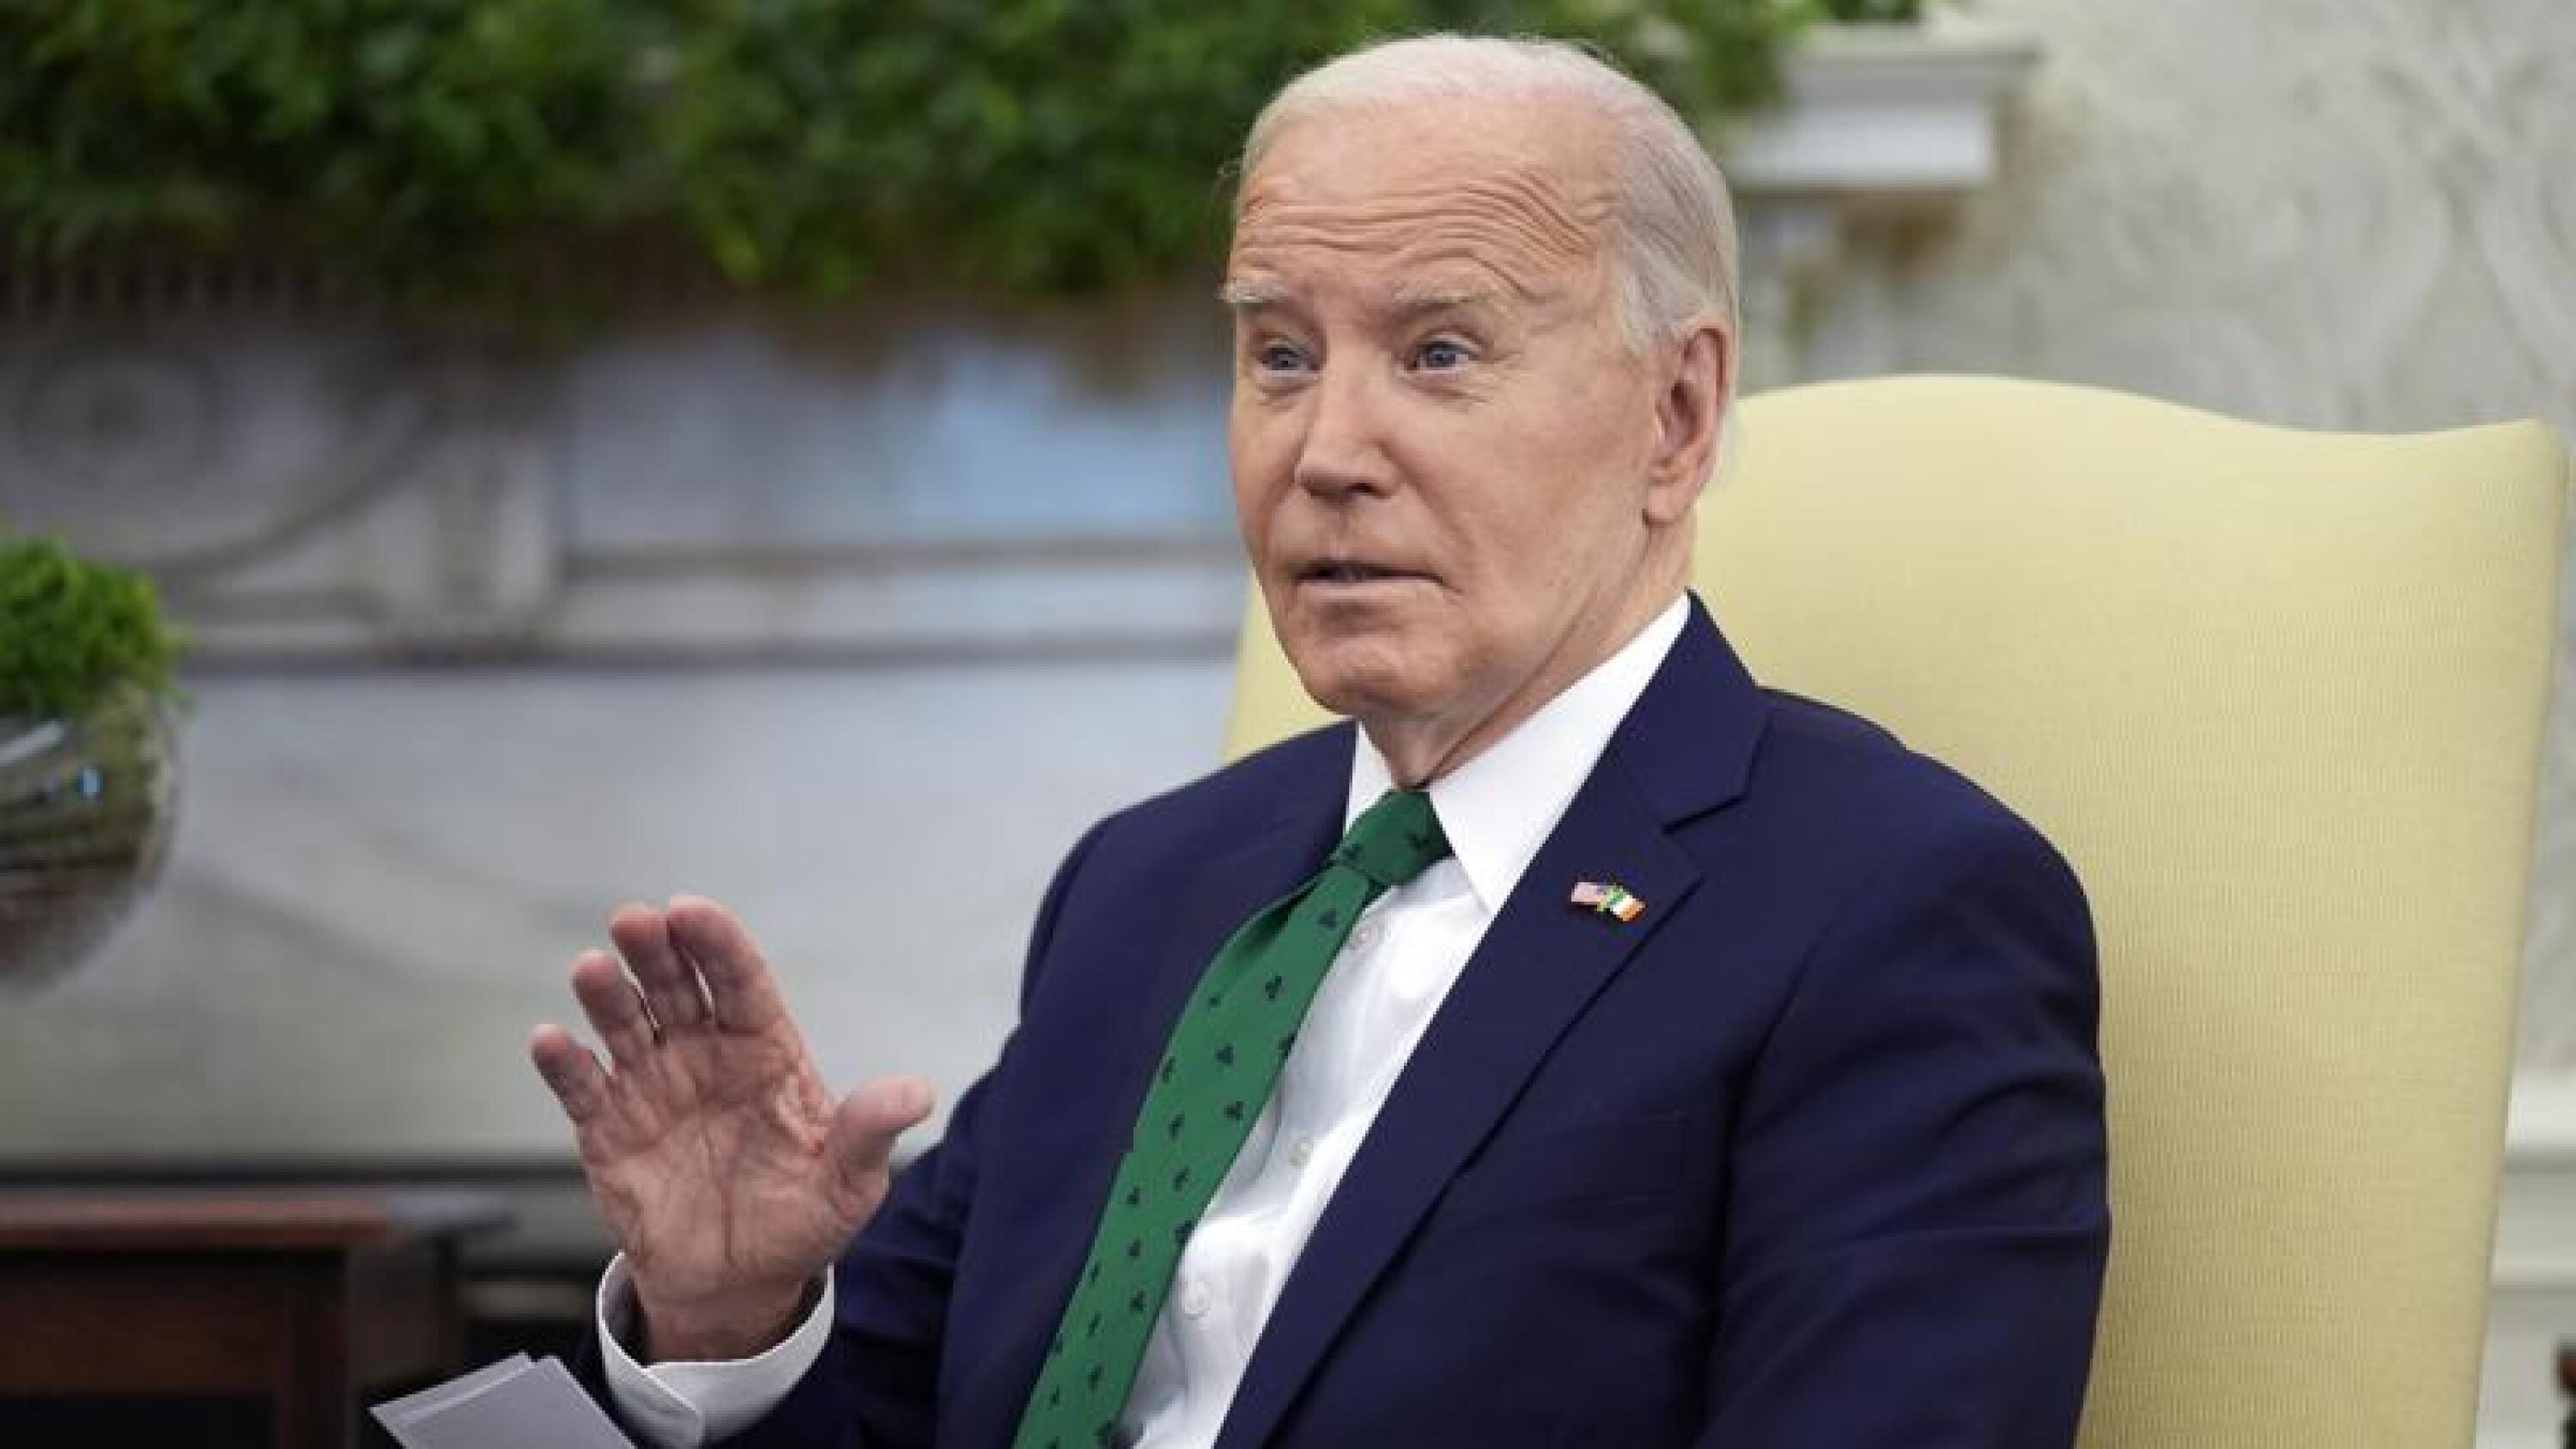 Biden at roast: Trump is the mentally unfit candidate, not me. 